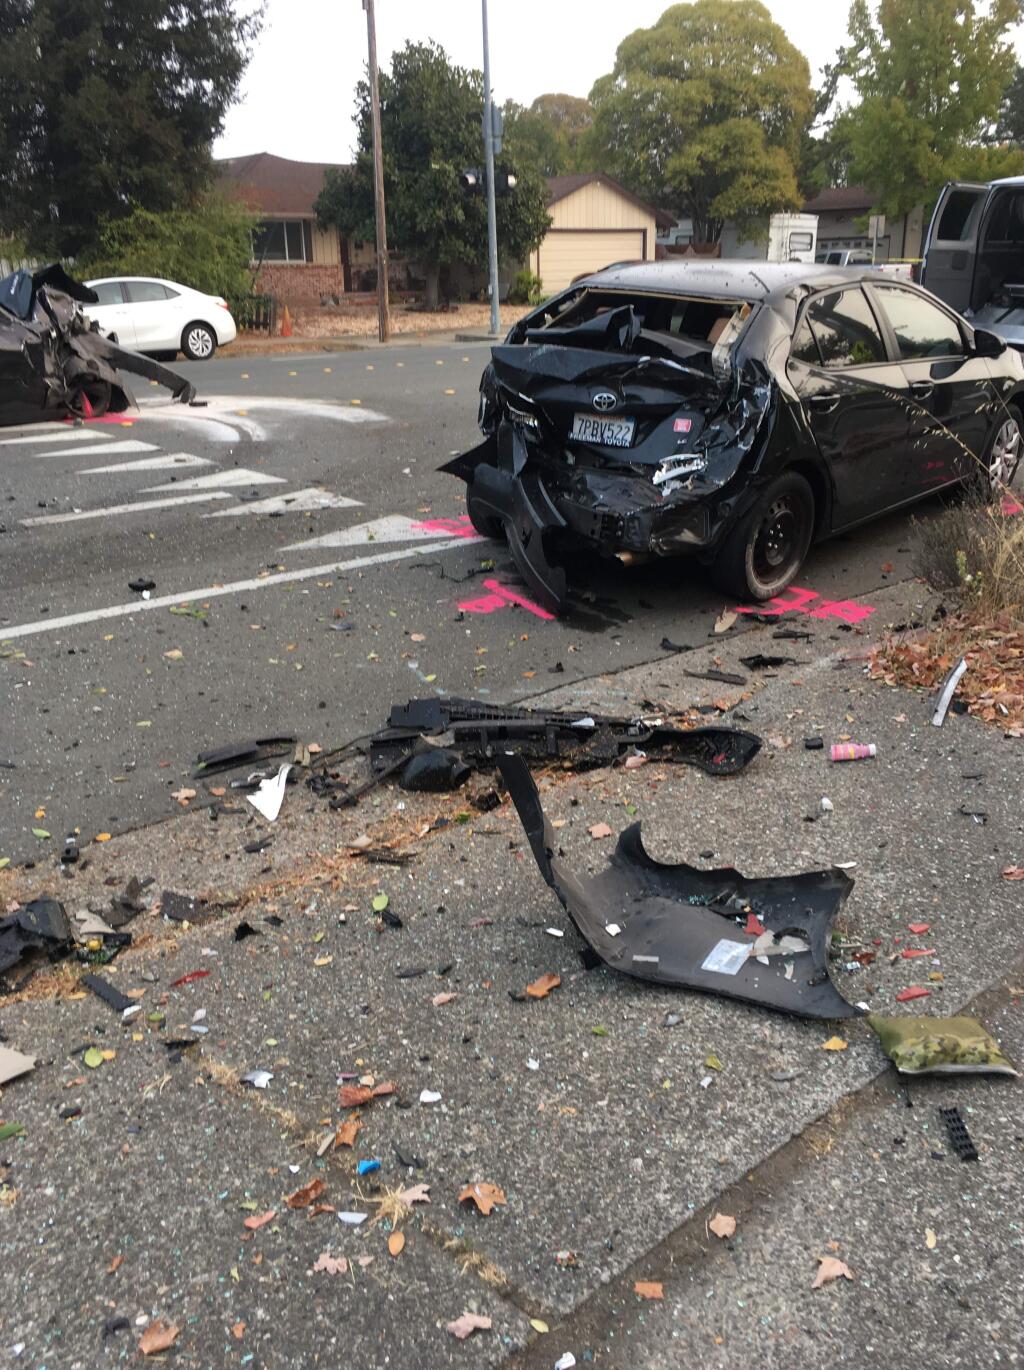 One person died and one person was injured in a crash in east Santa Rosa on Monday, Oct. 14, 2019. (SANTA ROSA POLICE DEPARTMENT)